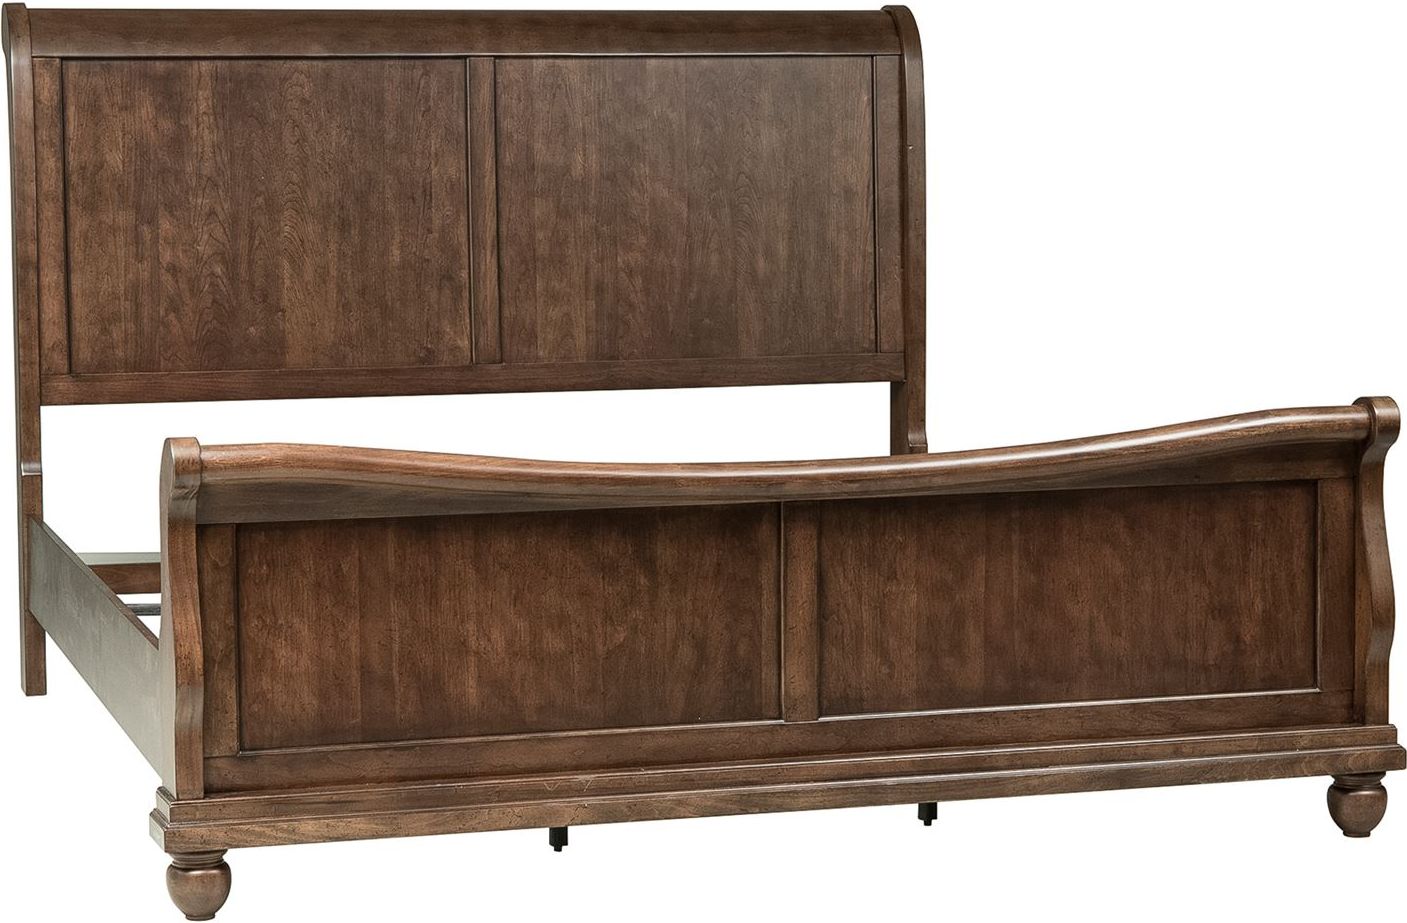 Liberty Furniture Rustic Traditions Rustic Cherry King Sleigh Bed